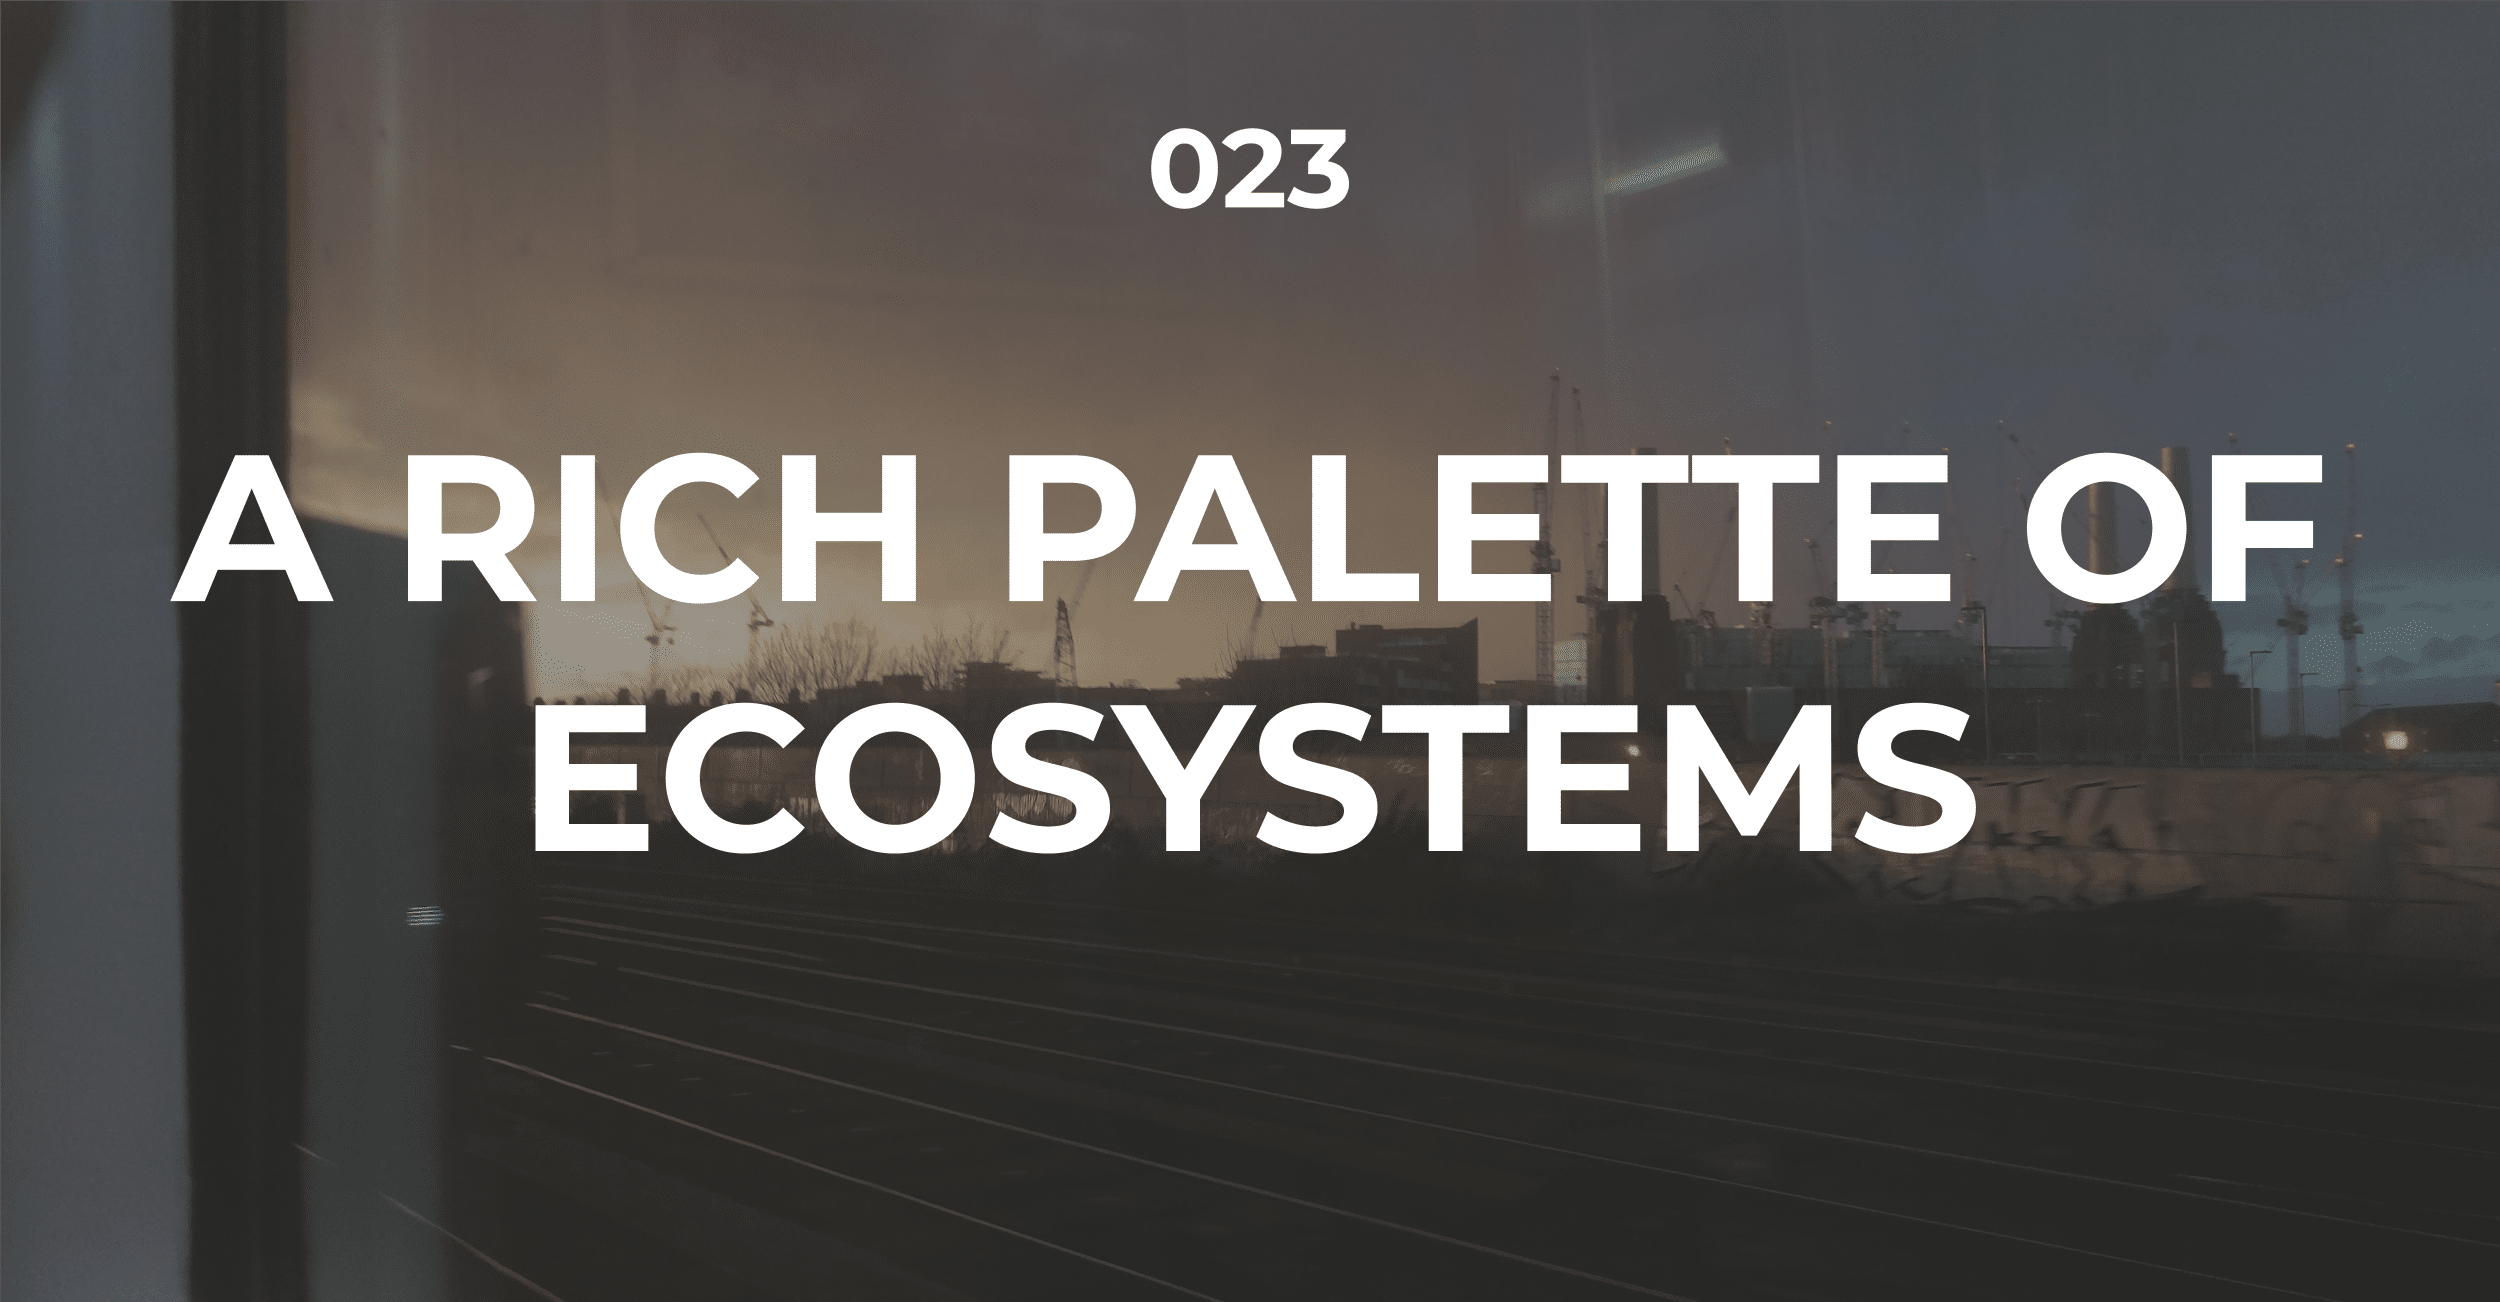 A rich palette of ecosystems